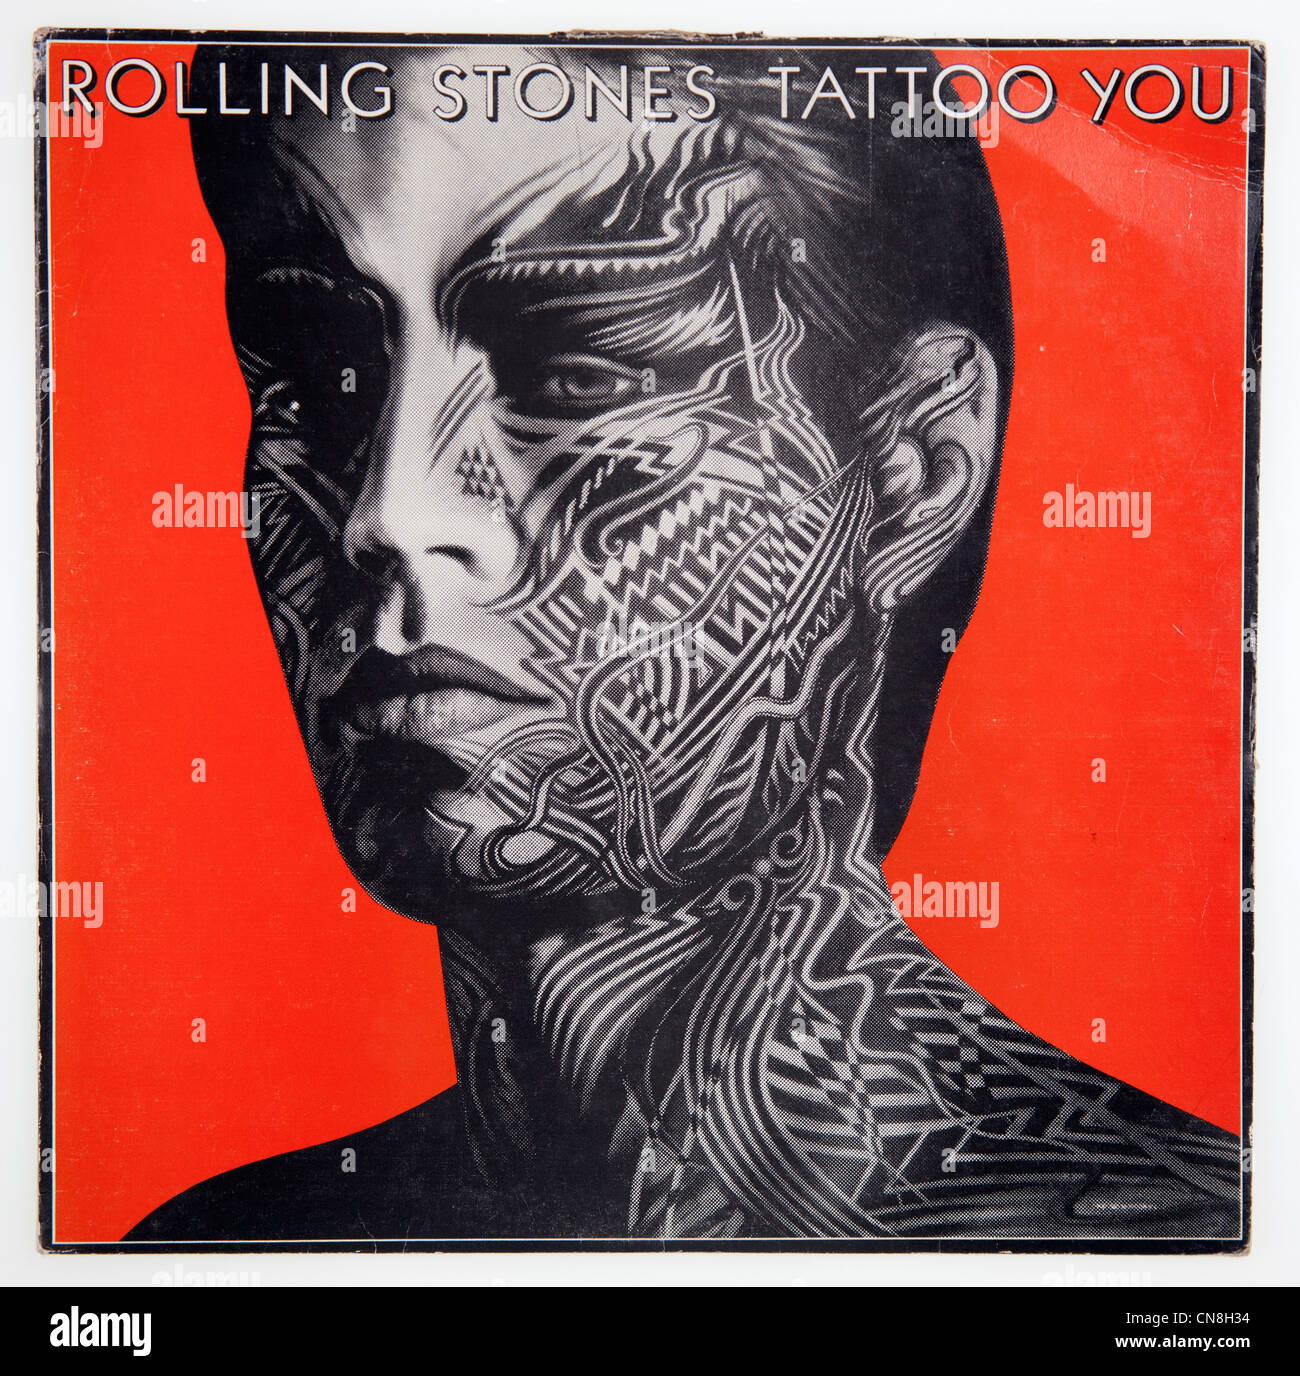 Cover of vinyl album Tattoo You by Rolling Stones, released 1981 on Virgin  Records Stock Photo - Alamy